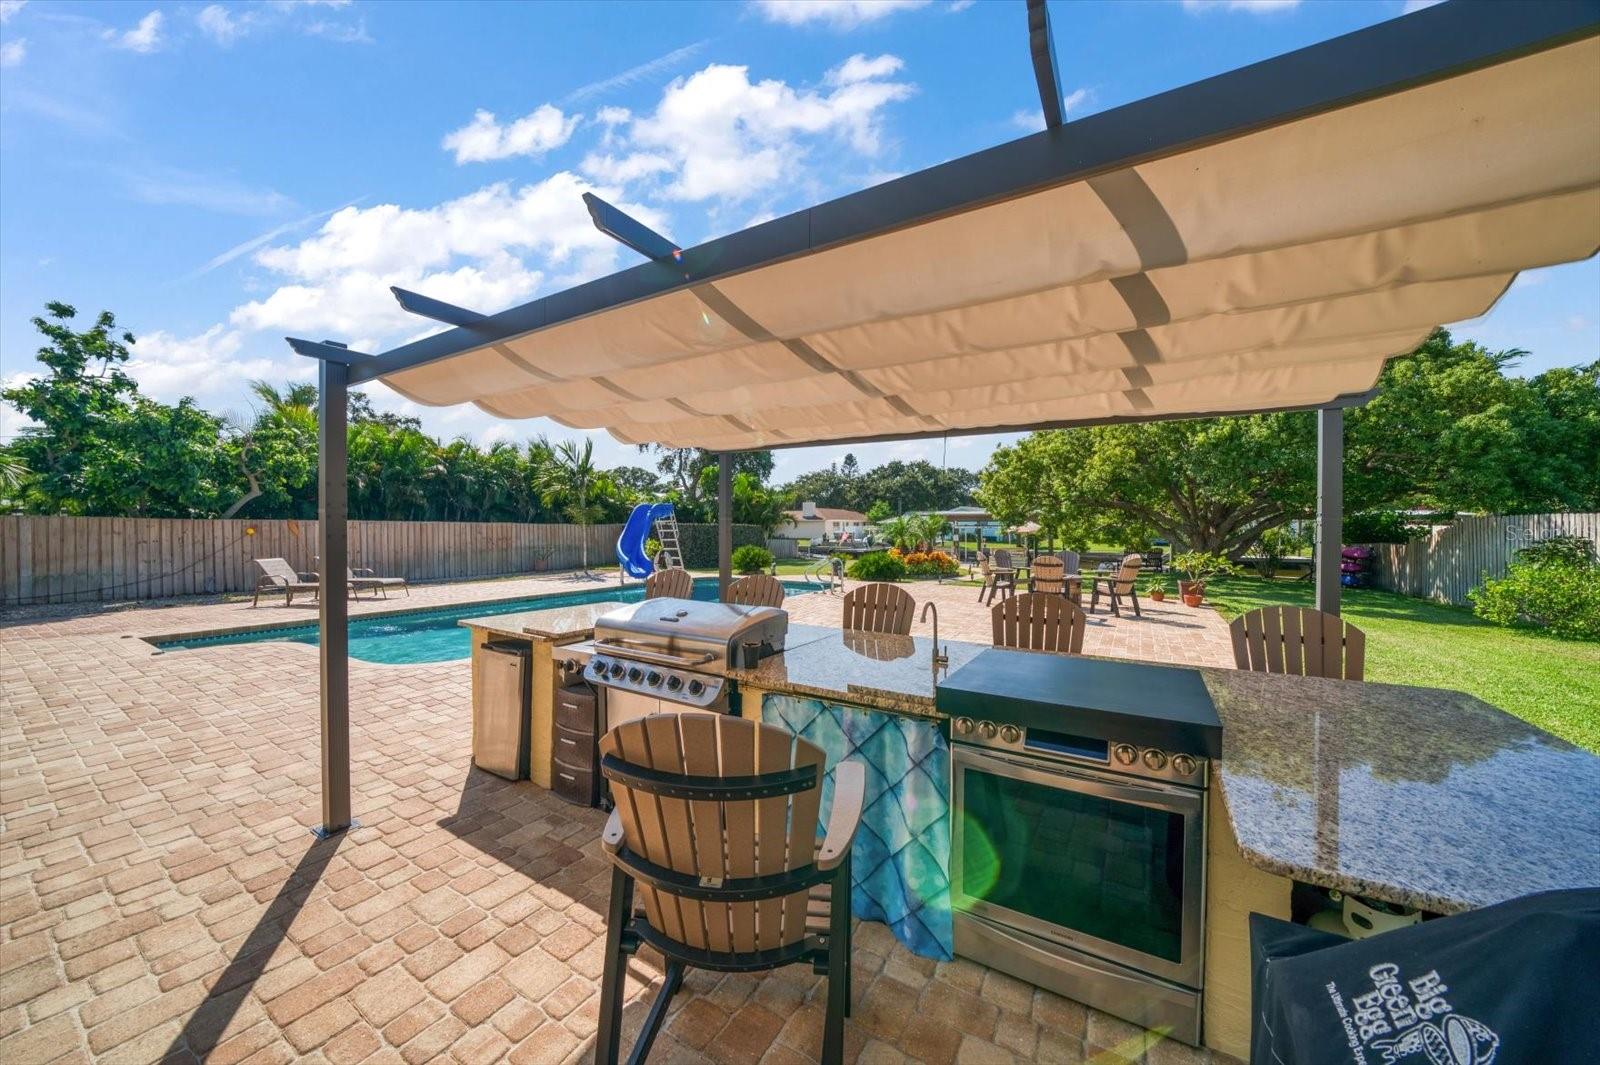 Outdoor kitchen area is perfect for Sunday bar-b-ques or enjoy cooling off in the sparkling pool, or cruising coastal waters in your boat moored at your dock.